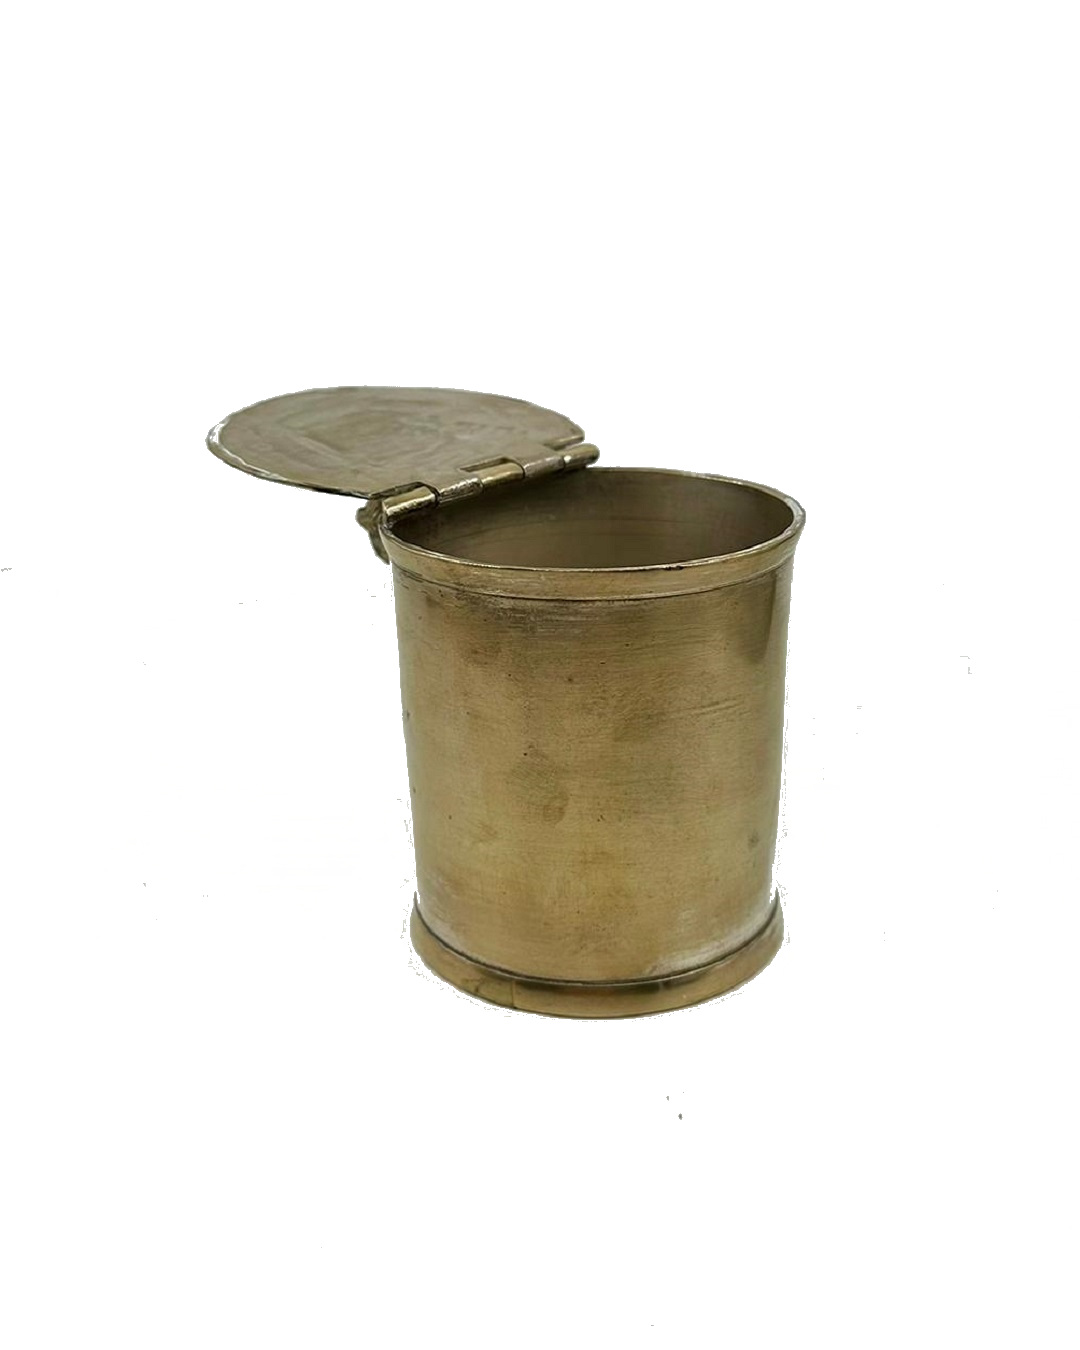 Silverplate hinged lid container